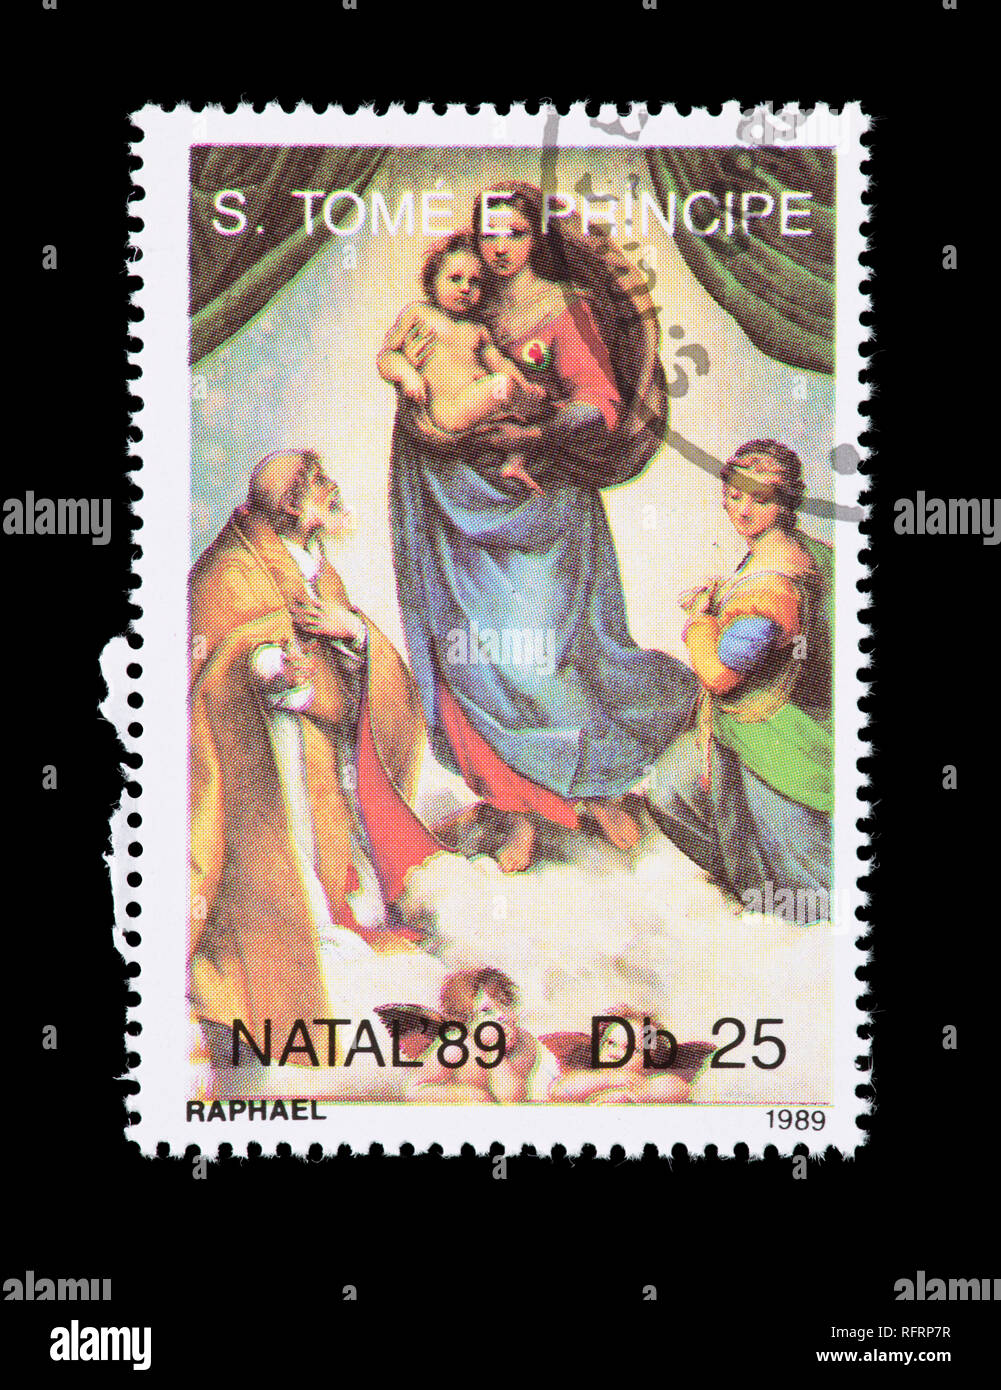 Postage stamp from the Saint Thomas and Prince Islands depicting detail from the Raphael painting Sistine Madonna Stock Photo